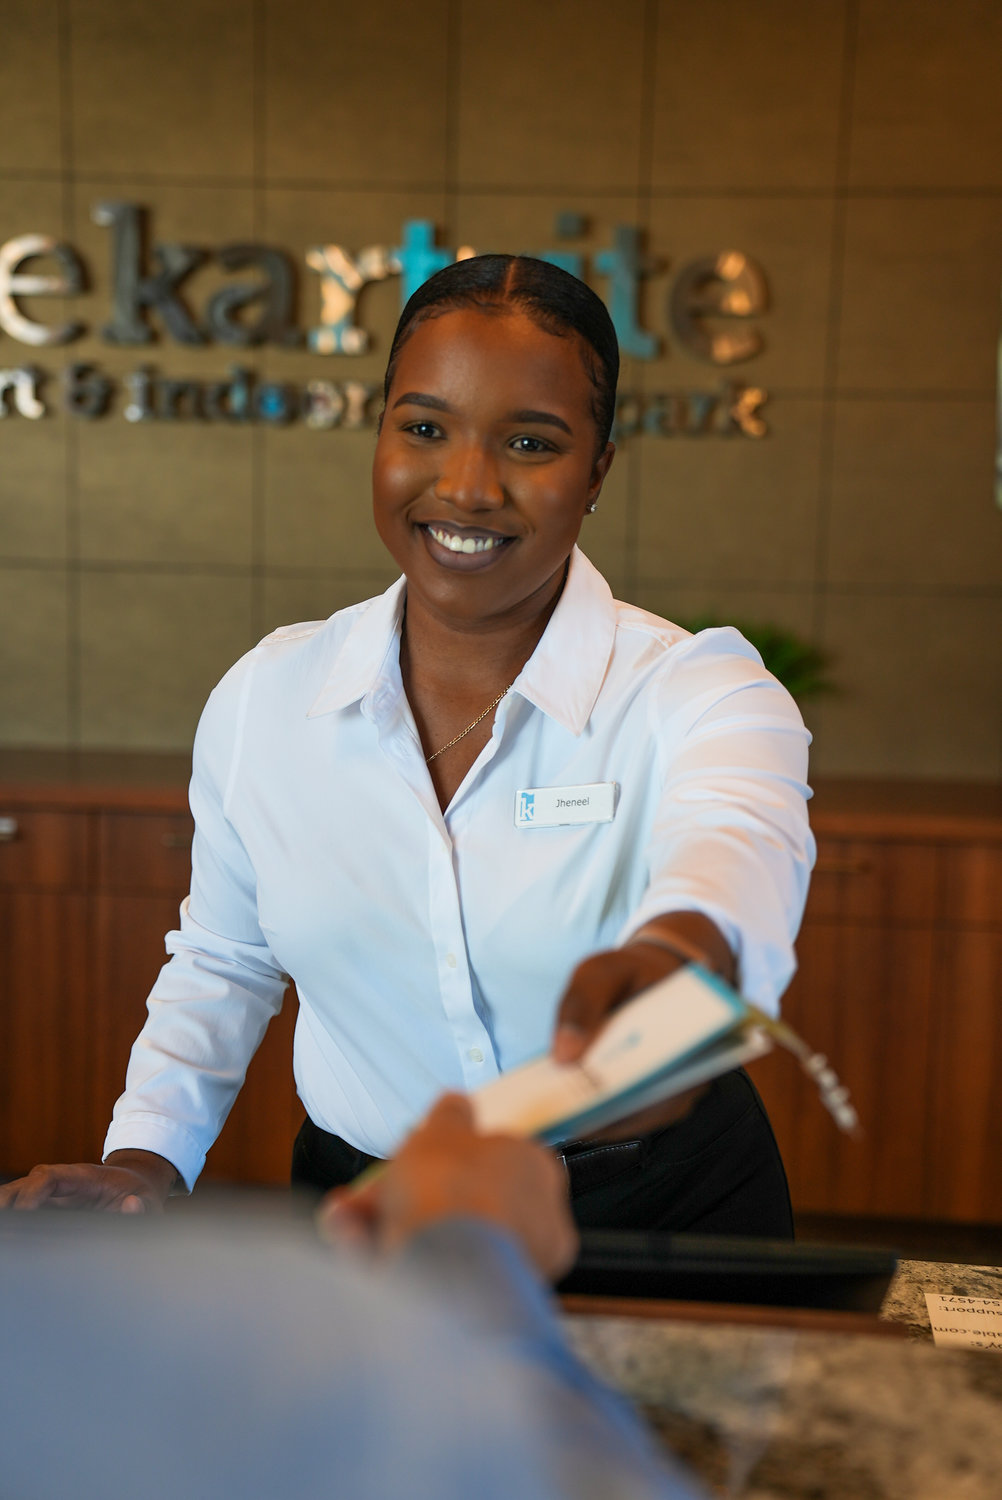 Jheneel Burkley, the front office manager at the Kartrite Resort and Indoor Waterpark, will be recognized for her hospitality.